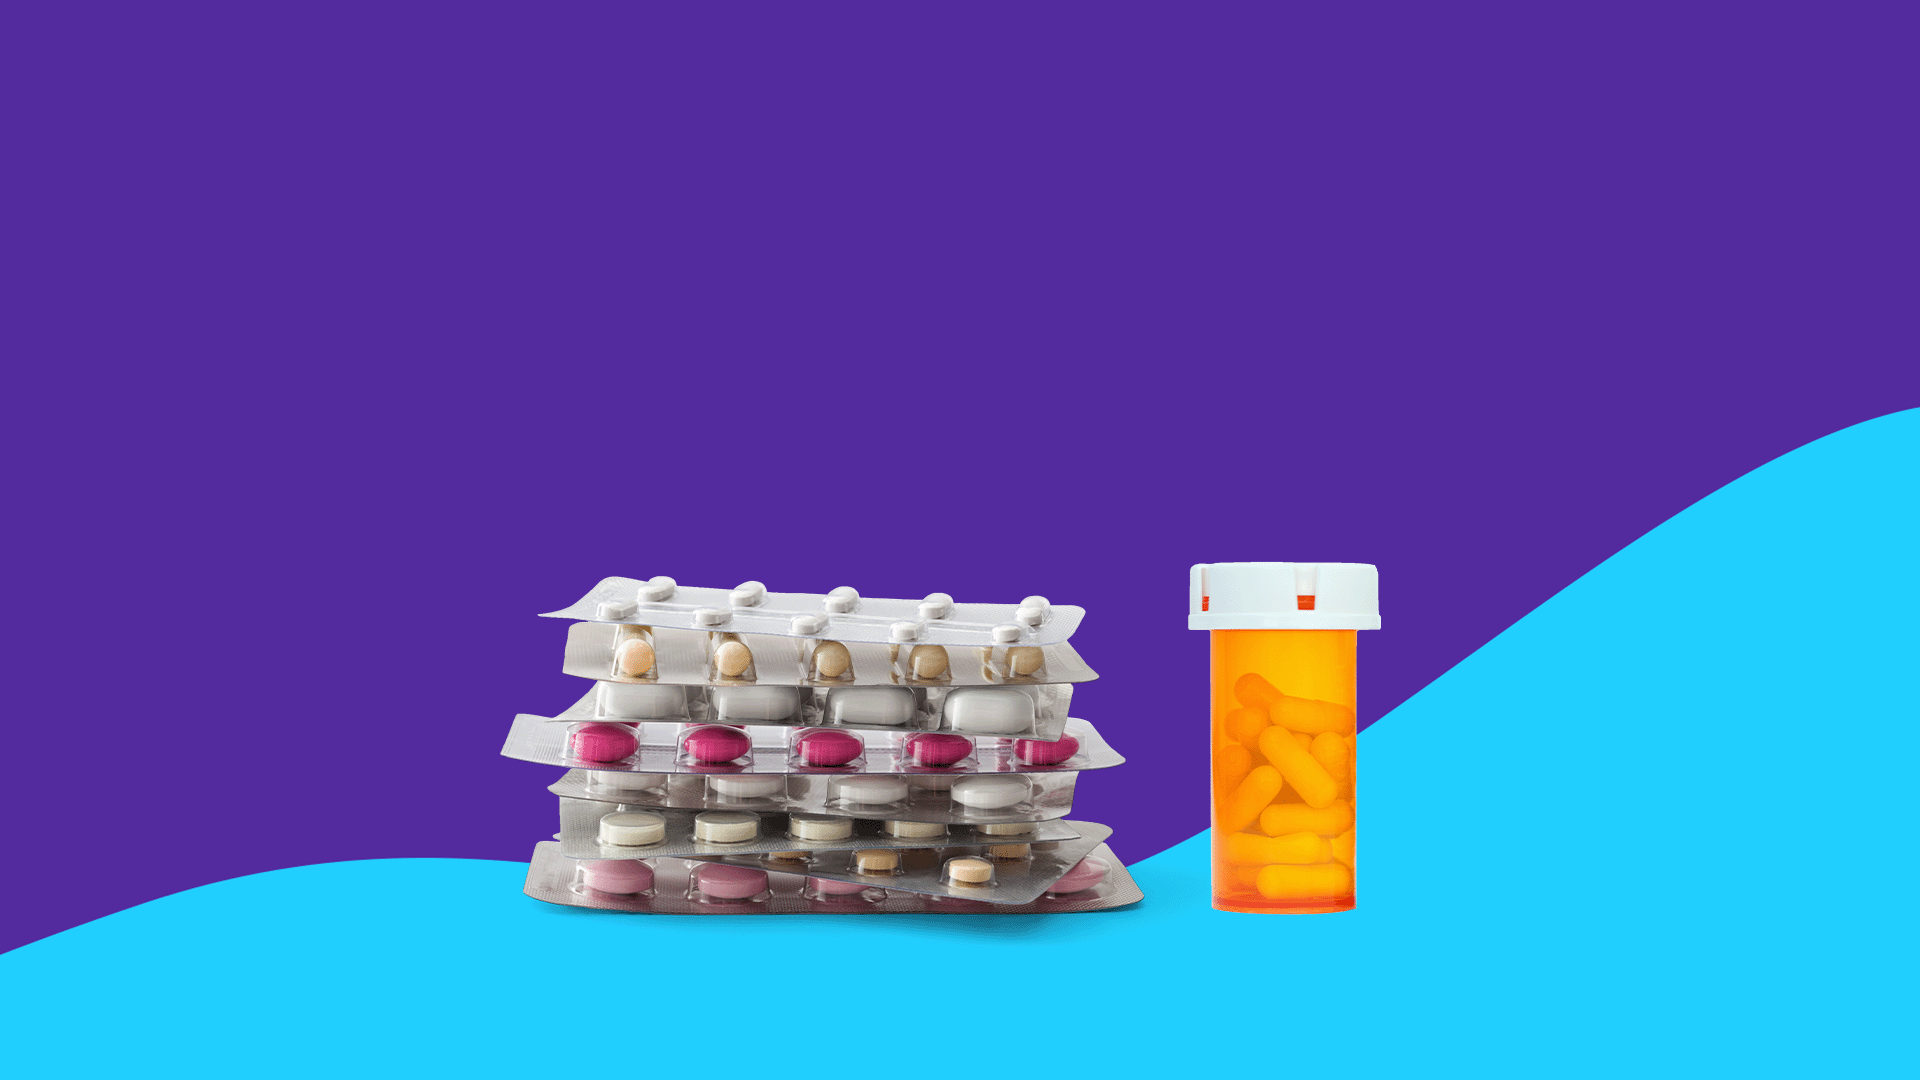 Rx pill bottle and pill packs: What can I take instead of Livalo?